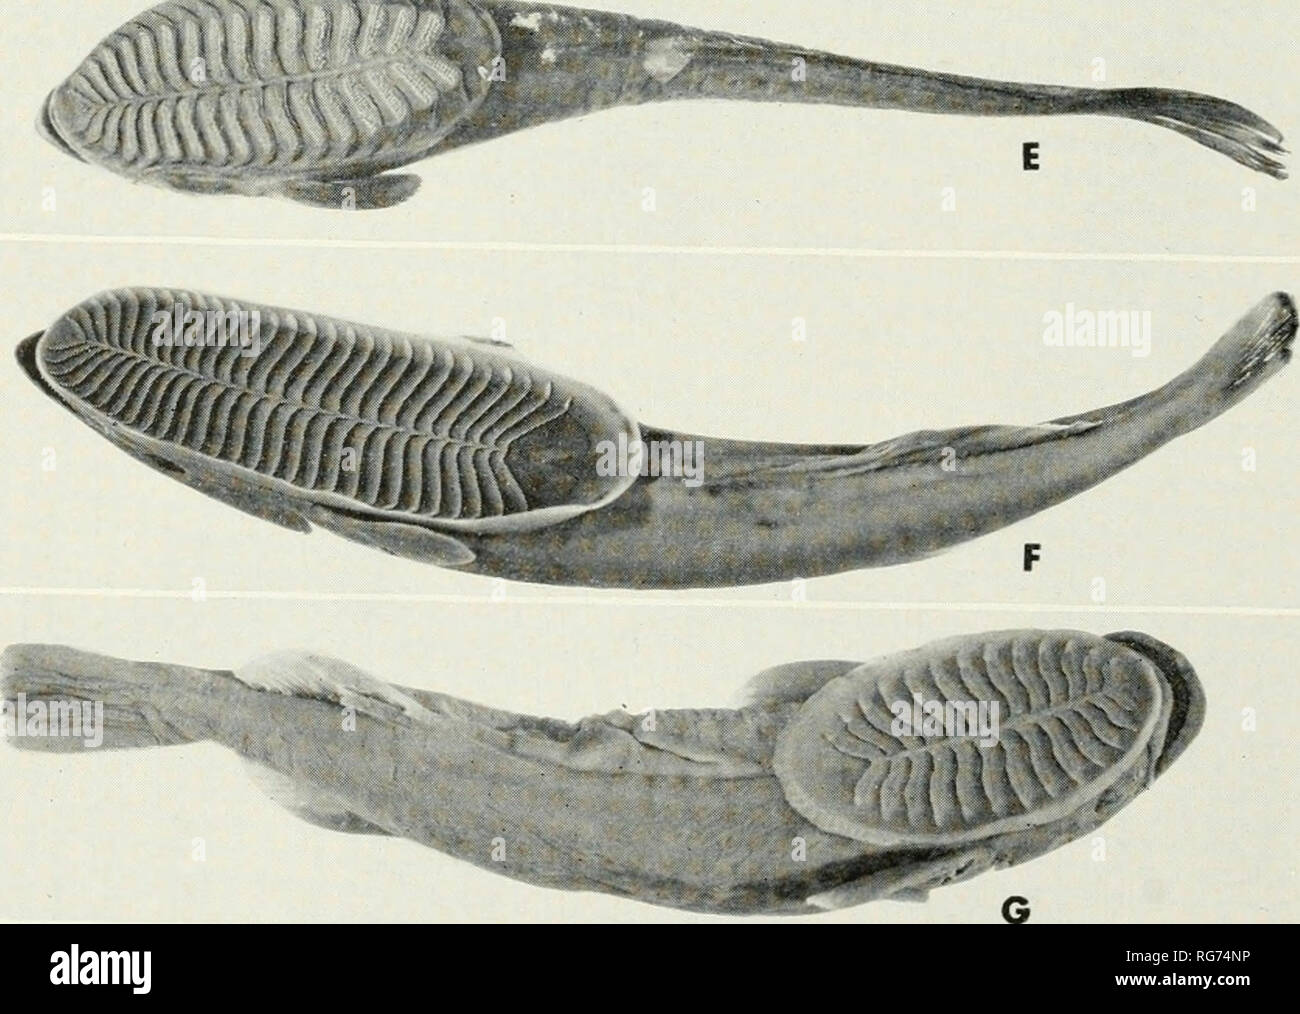 . Bulletin - United States National Museum. Science. -^mm^v&quot;. A, Echeneis naucrates Linnaeus, USNM 152123, 544 mm. in standard length, from Guam- B, Phtheirichthys hnealus (Menzies), USNM 149972, 125 mm., off coast of Georgia,' C, Remora remora (Linnaeus), USNM 83809, 129 mm., from Atlantic City, New Jersey! D, Remora brachyptera (Lowe), CNHM 41291, 136 mm., from the Galapagos Is.; e' Remora osteochir (Cuvier), USNM 153581, 204 mm., from Cuba; F, Remora aus'irali's (Bennett), UiMMZ 164784, 149 mm., from Japan; G, Remorina albescens (Temminck and Schlegel), UMMZ 164785, 159 mm., from Japan Stock Photo